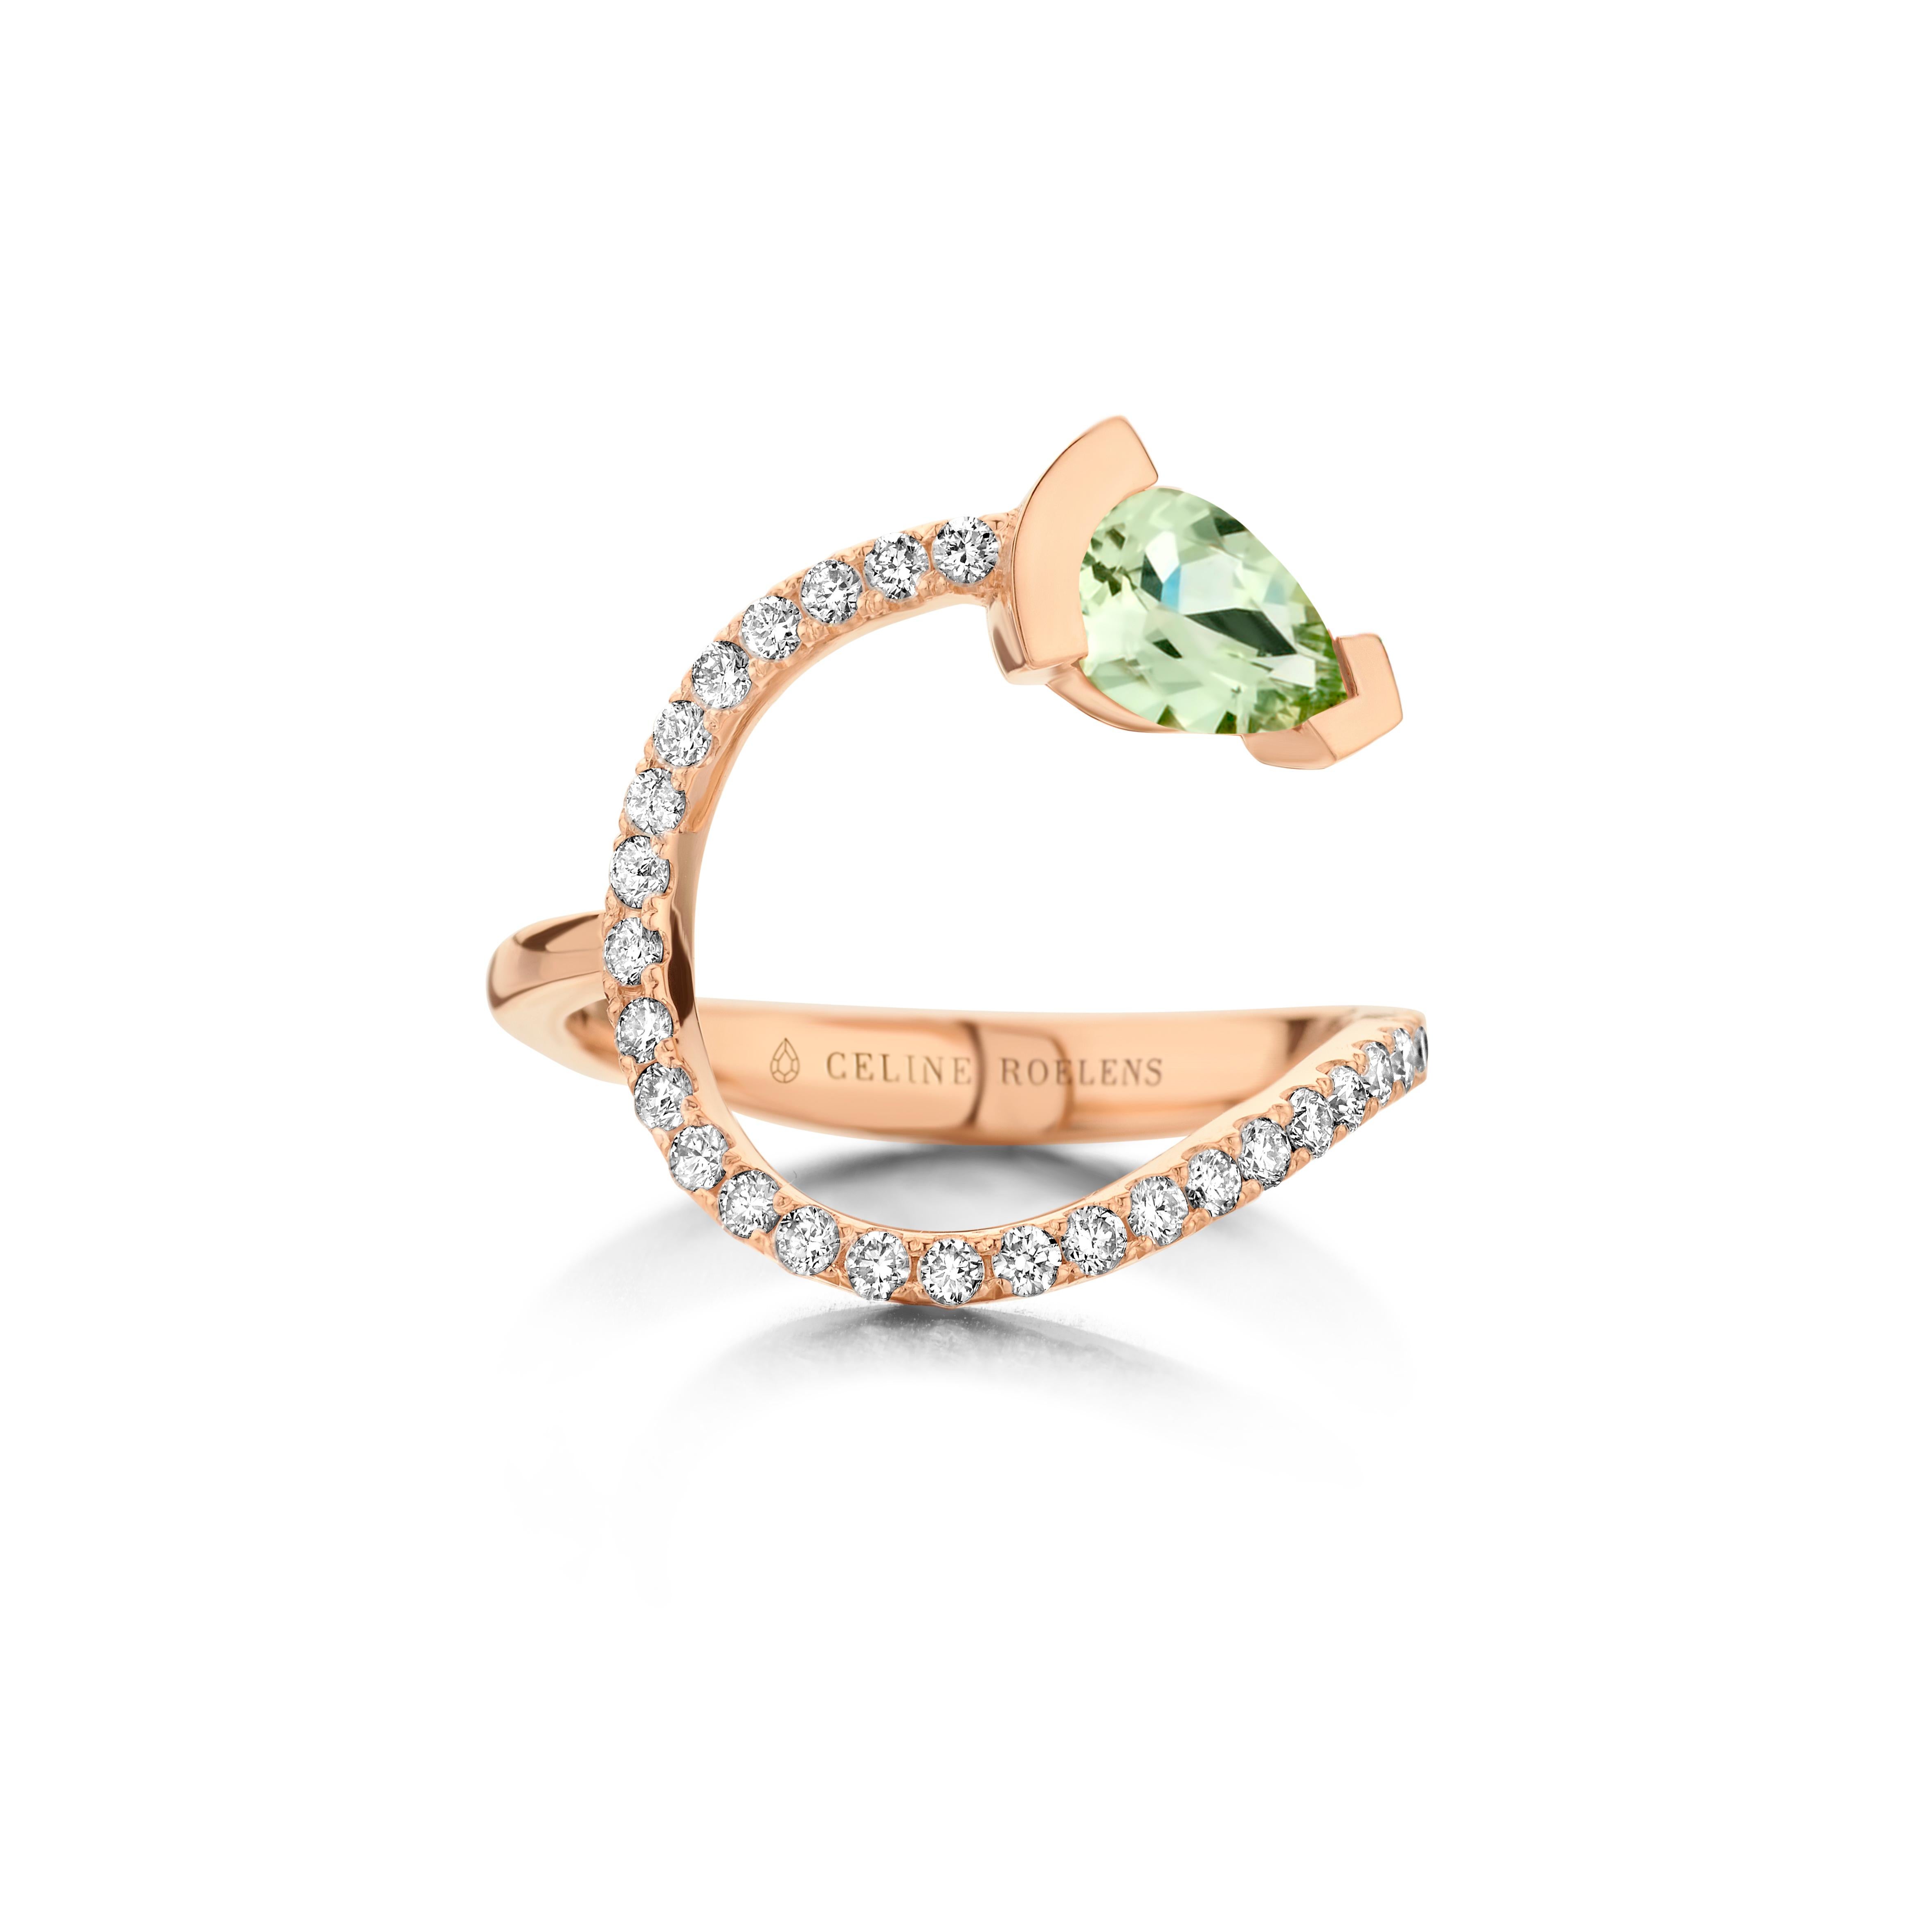 ADELINE curved ring in 18Kt yellow gold set with a pear shaped Green beryl and 0,33 Ct of white brilliant cut diamonds - VS F quality.